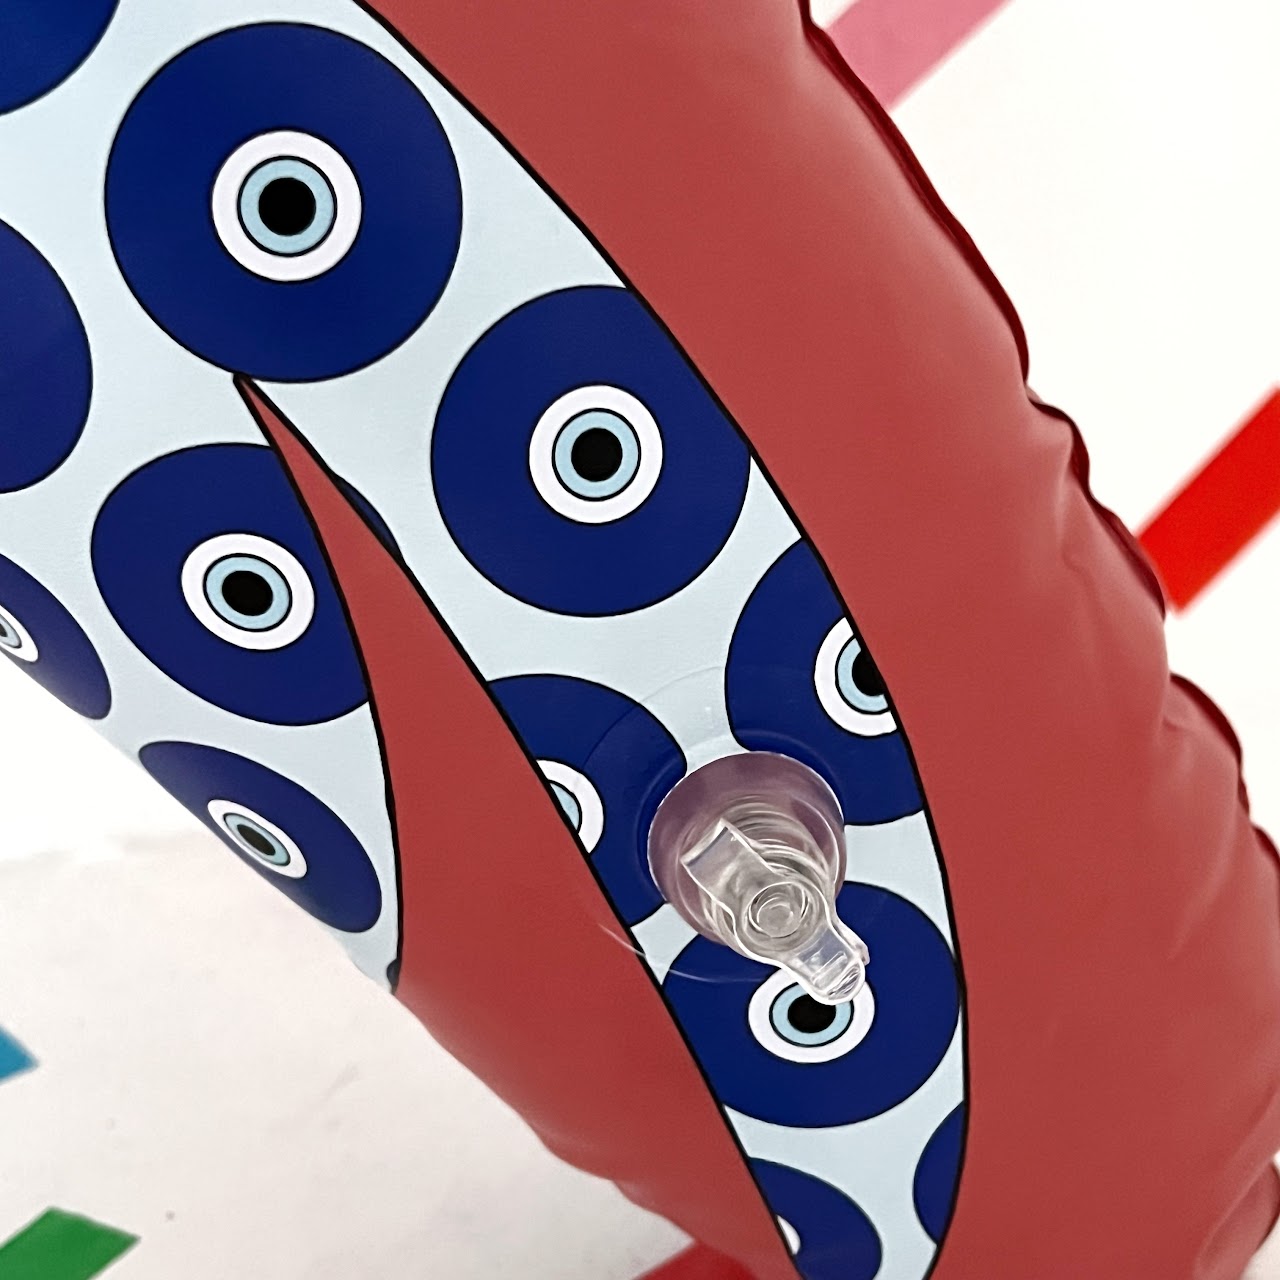 Sophia Wallace 'Evil Eye' Signed Inflatable Clitoris Sculpture #2